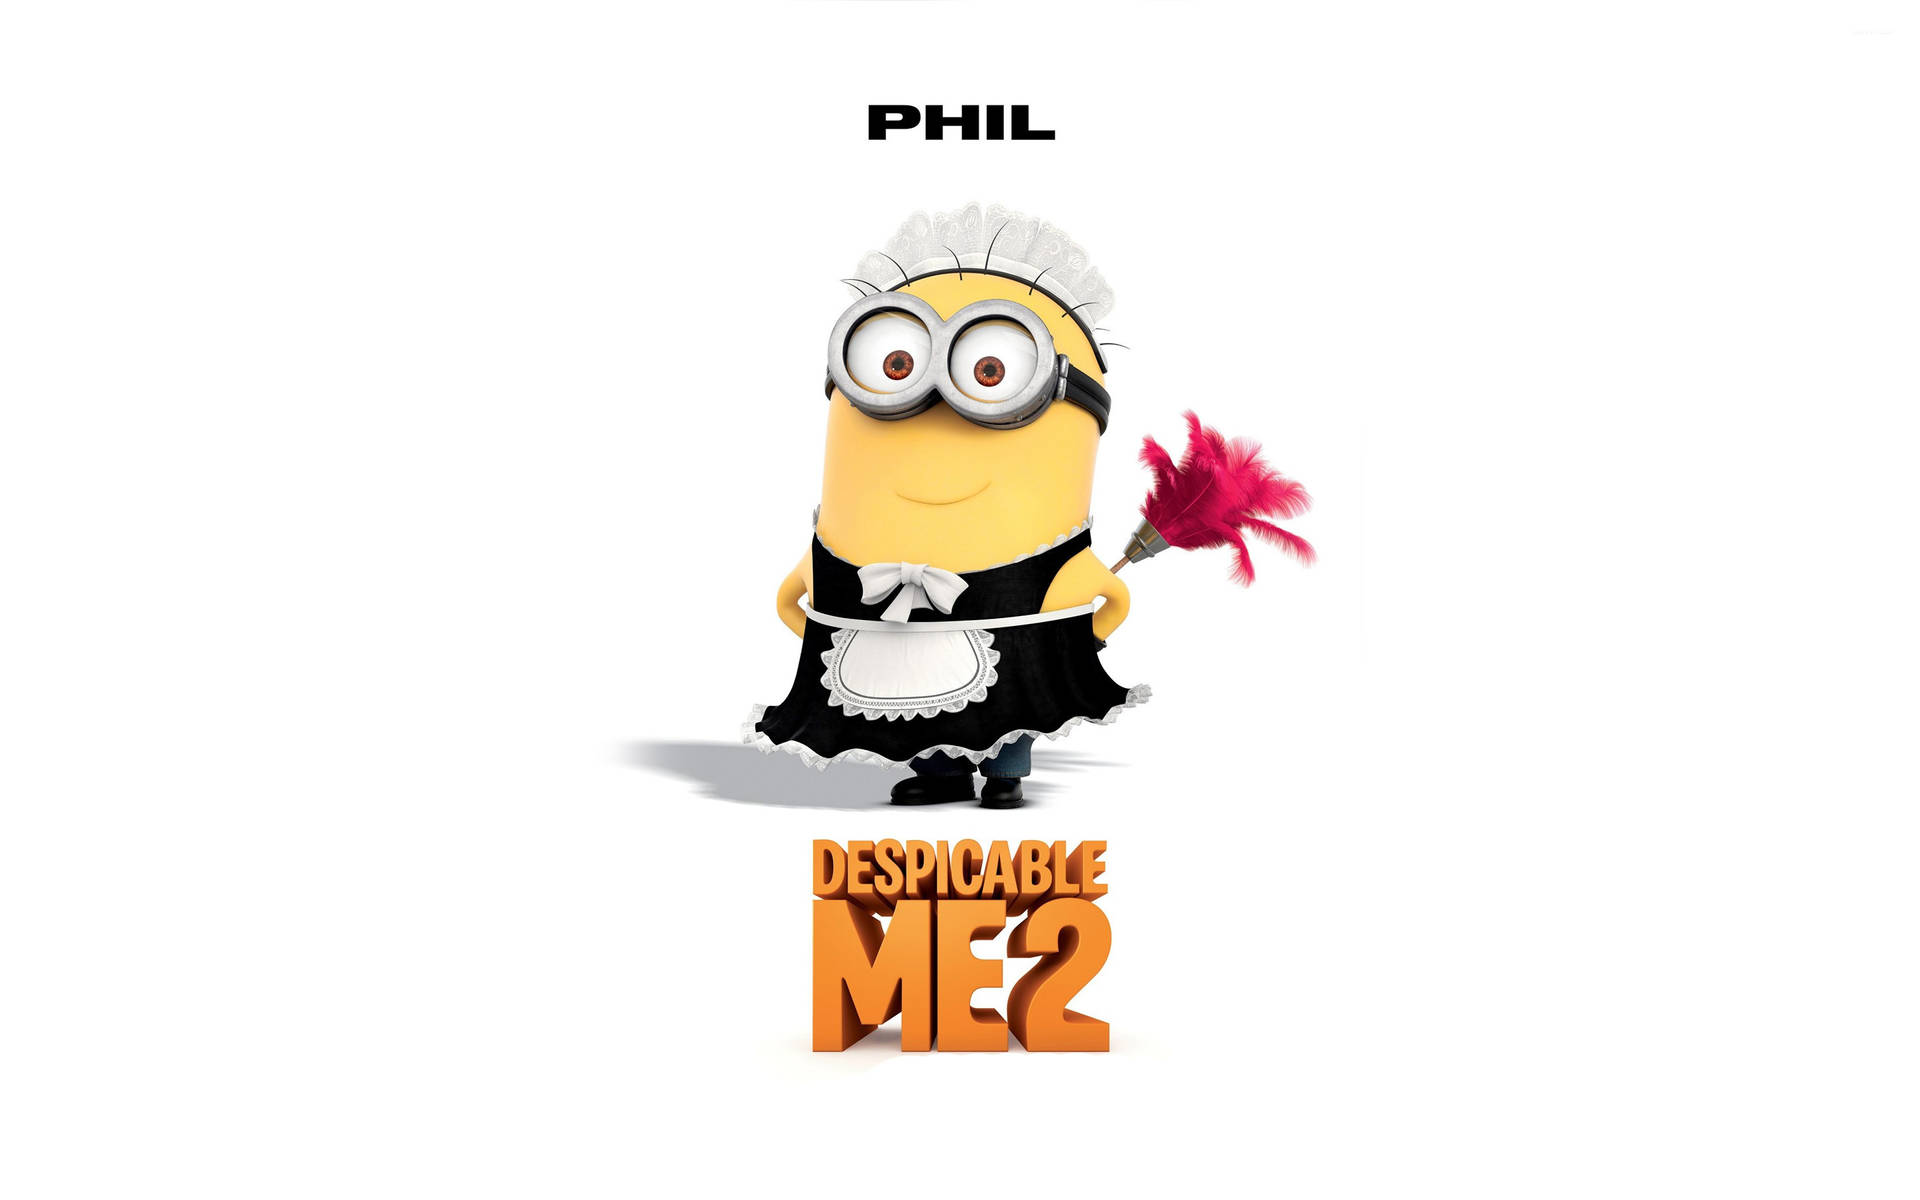 Phil The Maid Despicable Me 2 Poster Wallpaper